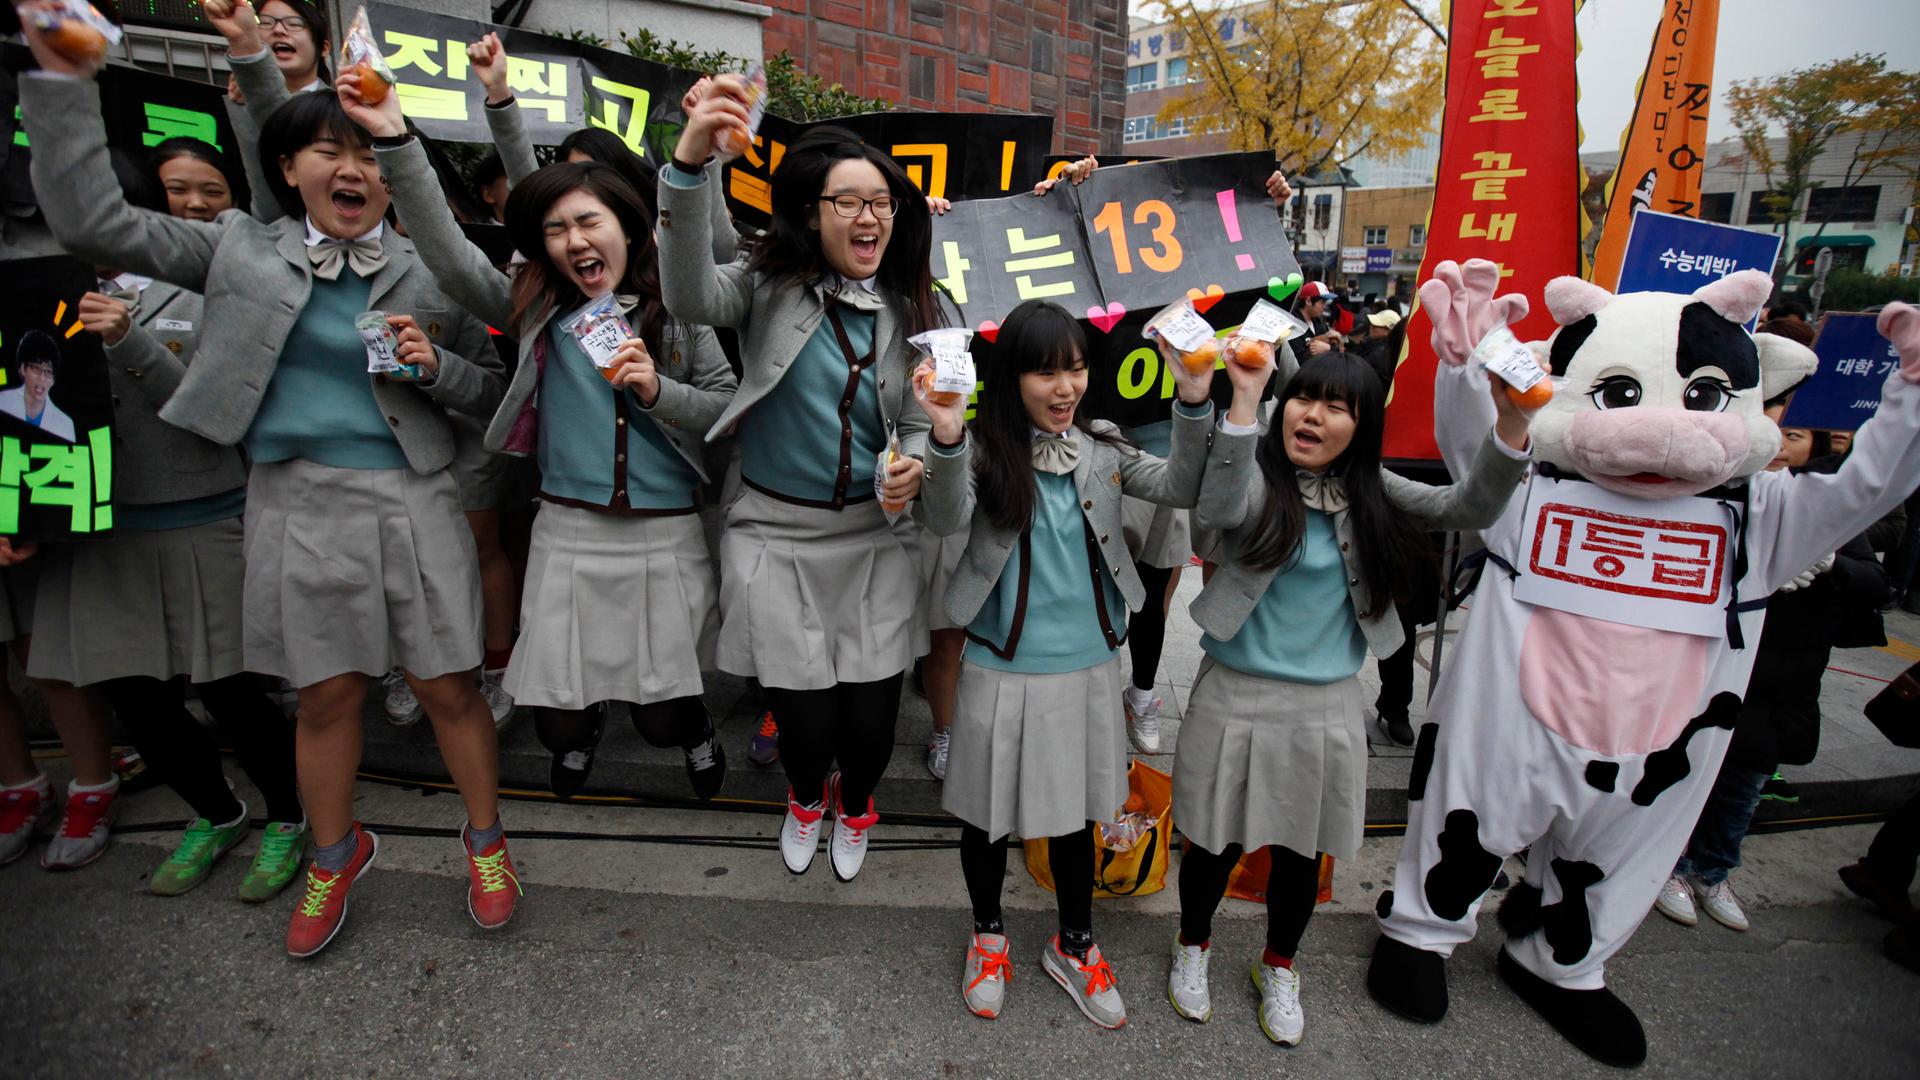 Students from a high school cheer for their seniors in front of a college entrance examination hall before the exam begins in Seoul, South Korea. 